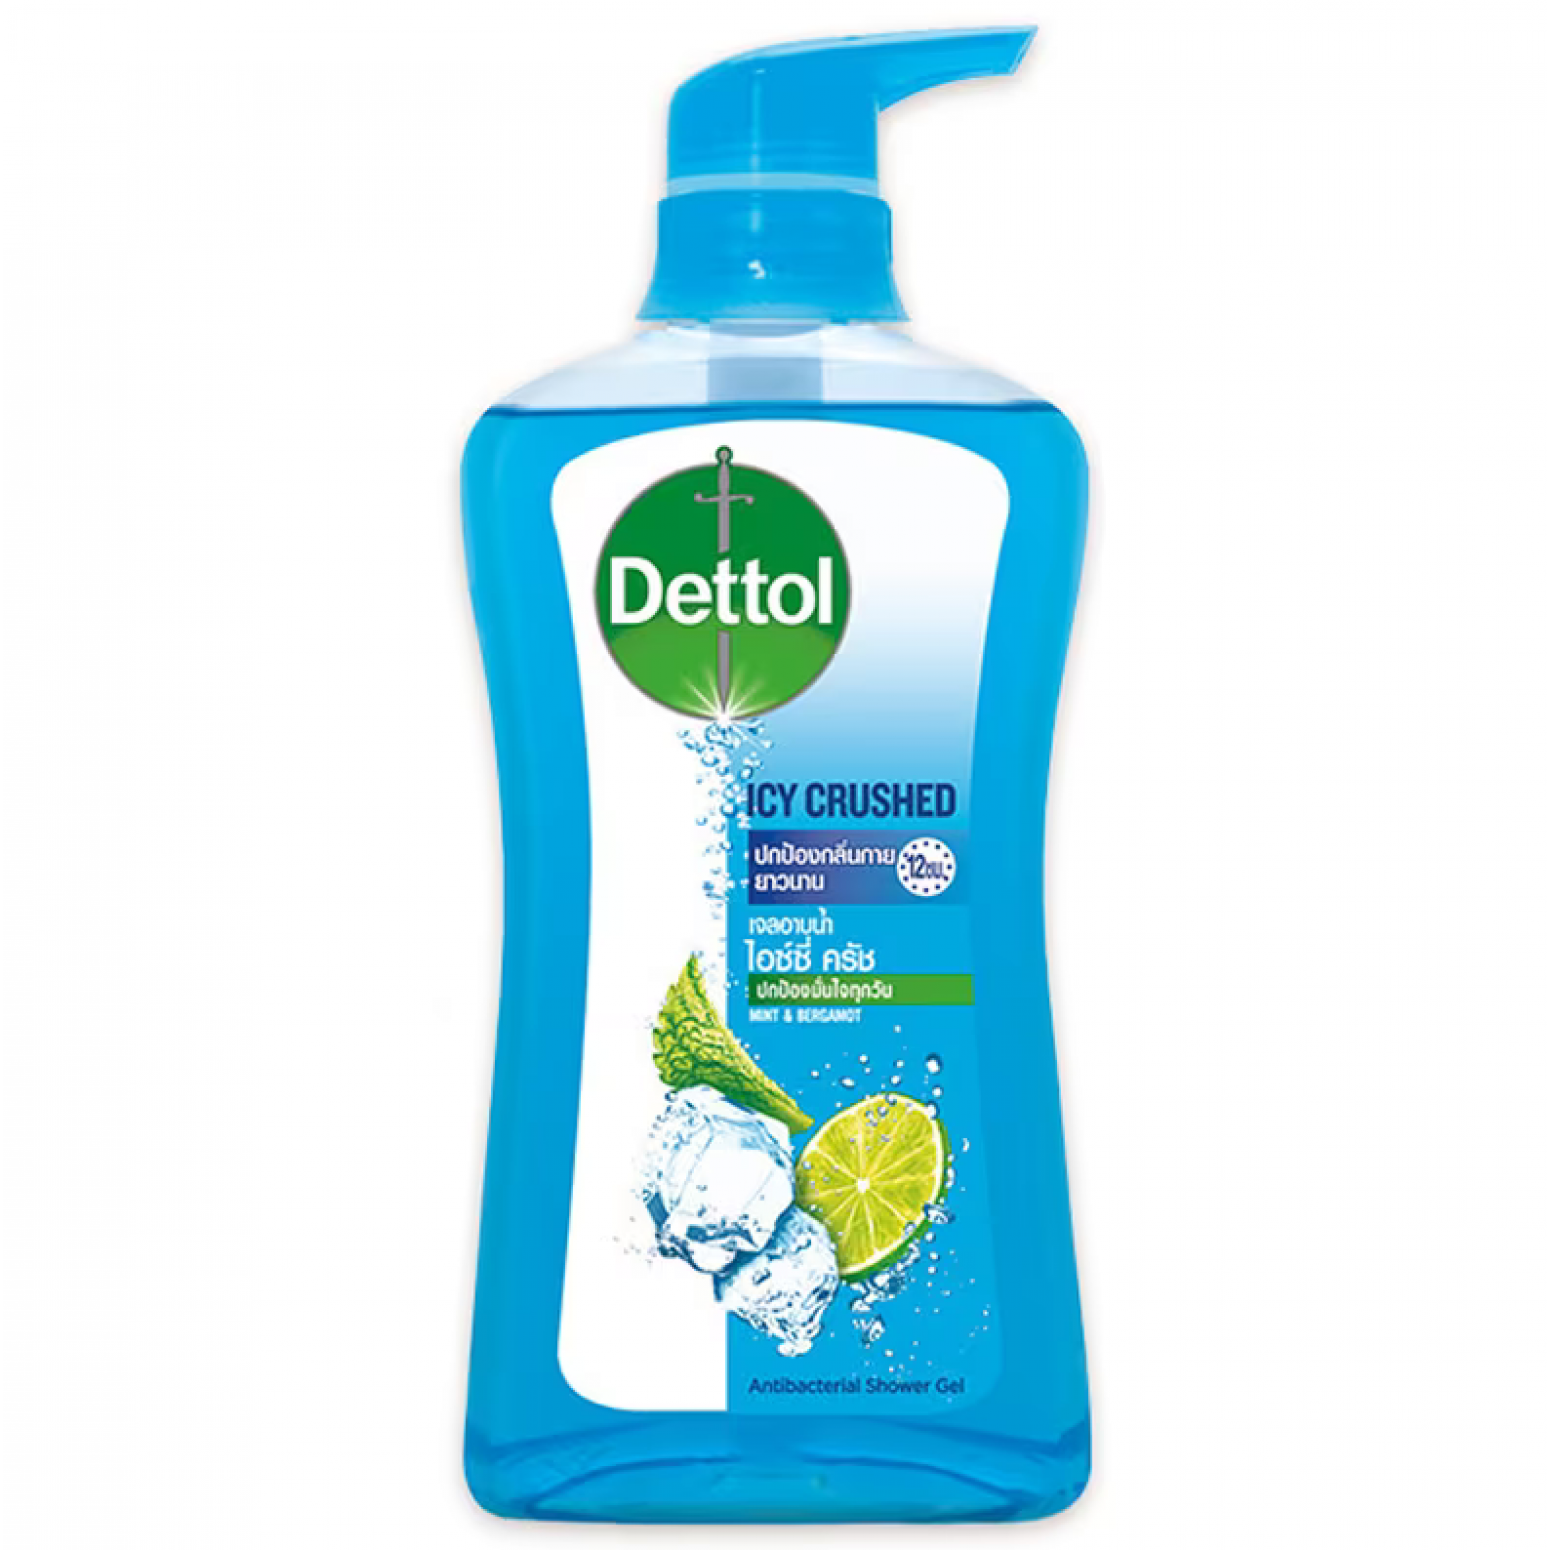 Dettol Shower Gel Icy Crushed 500ml.